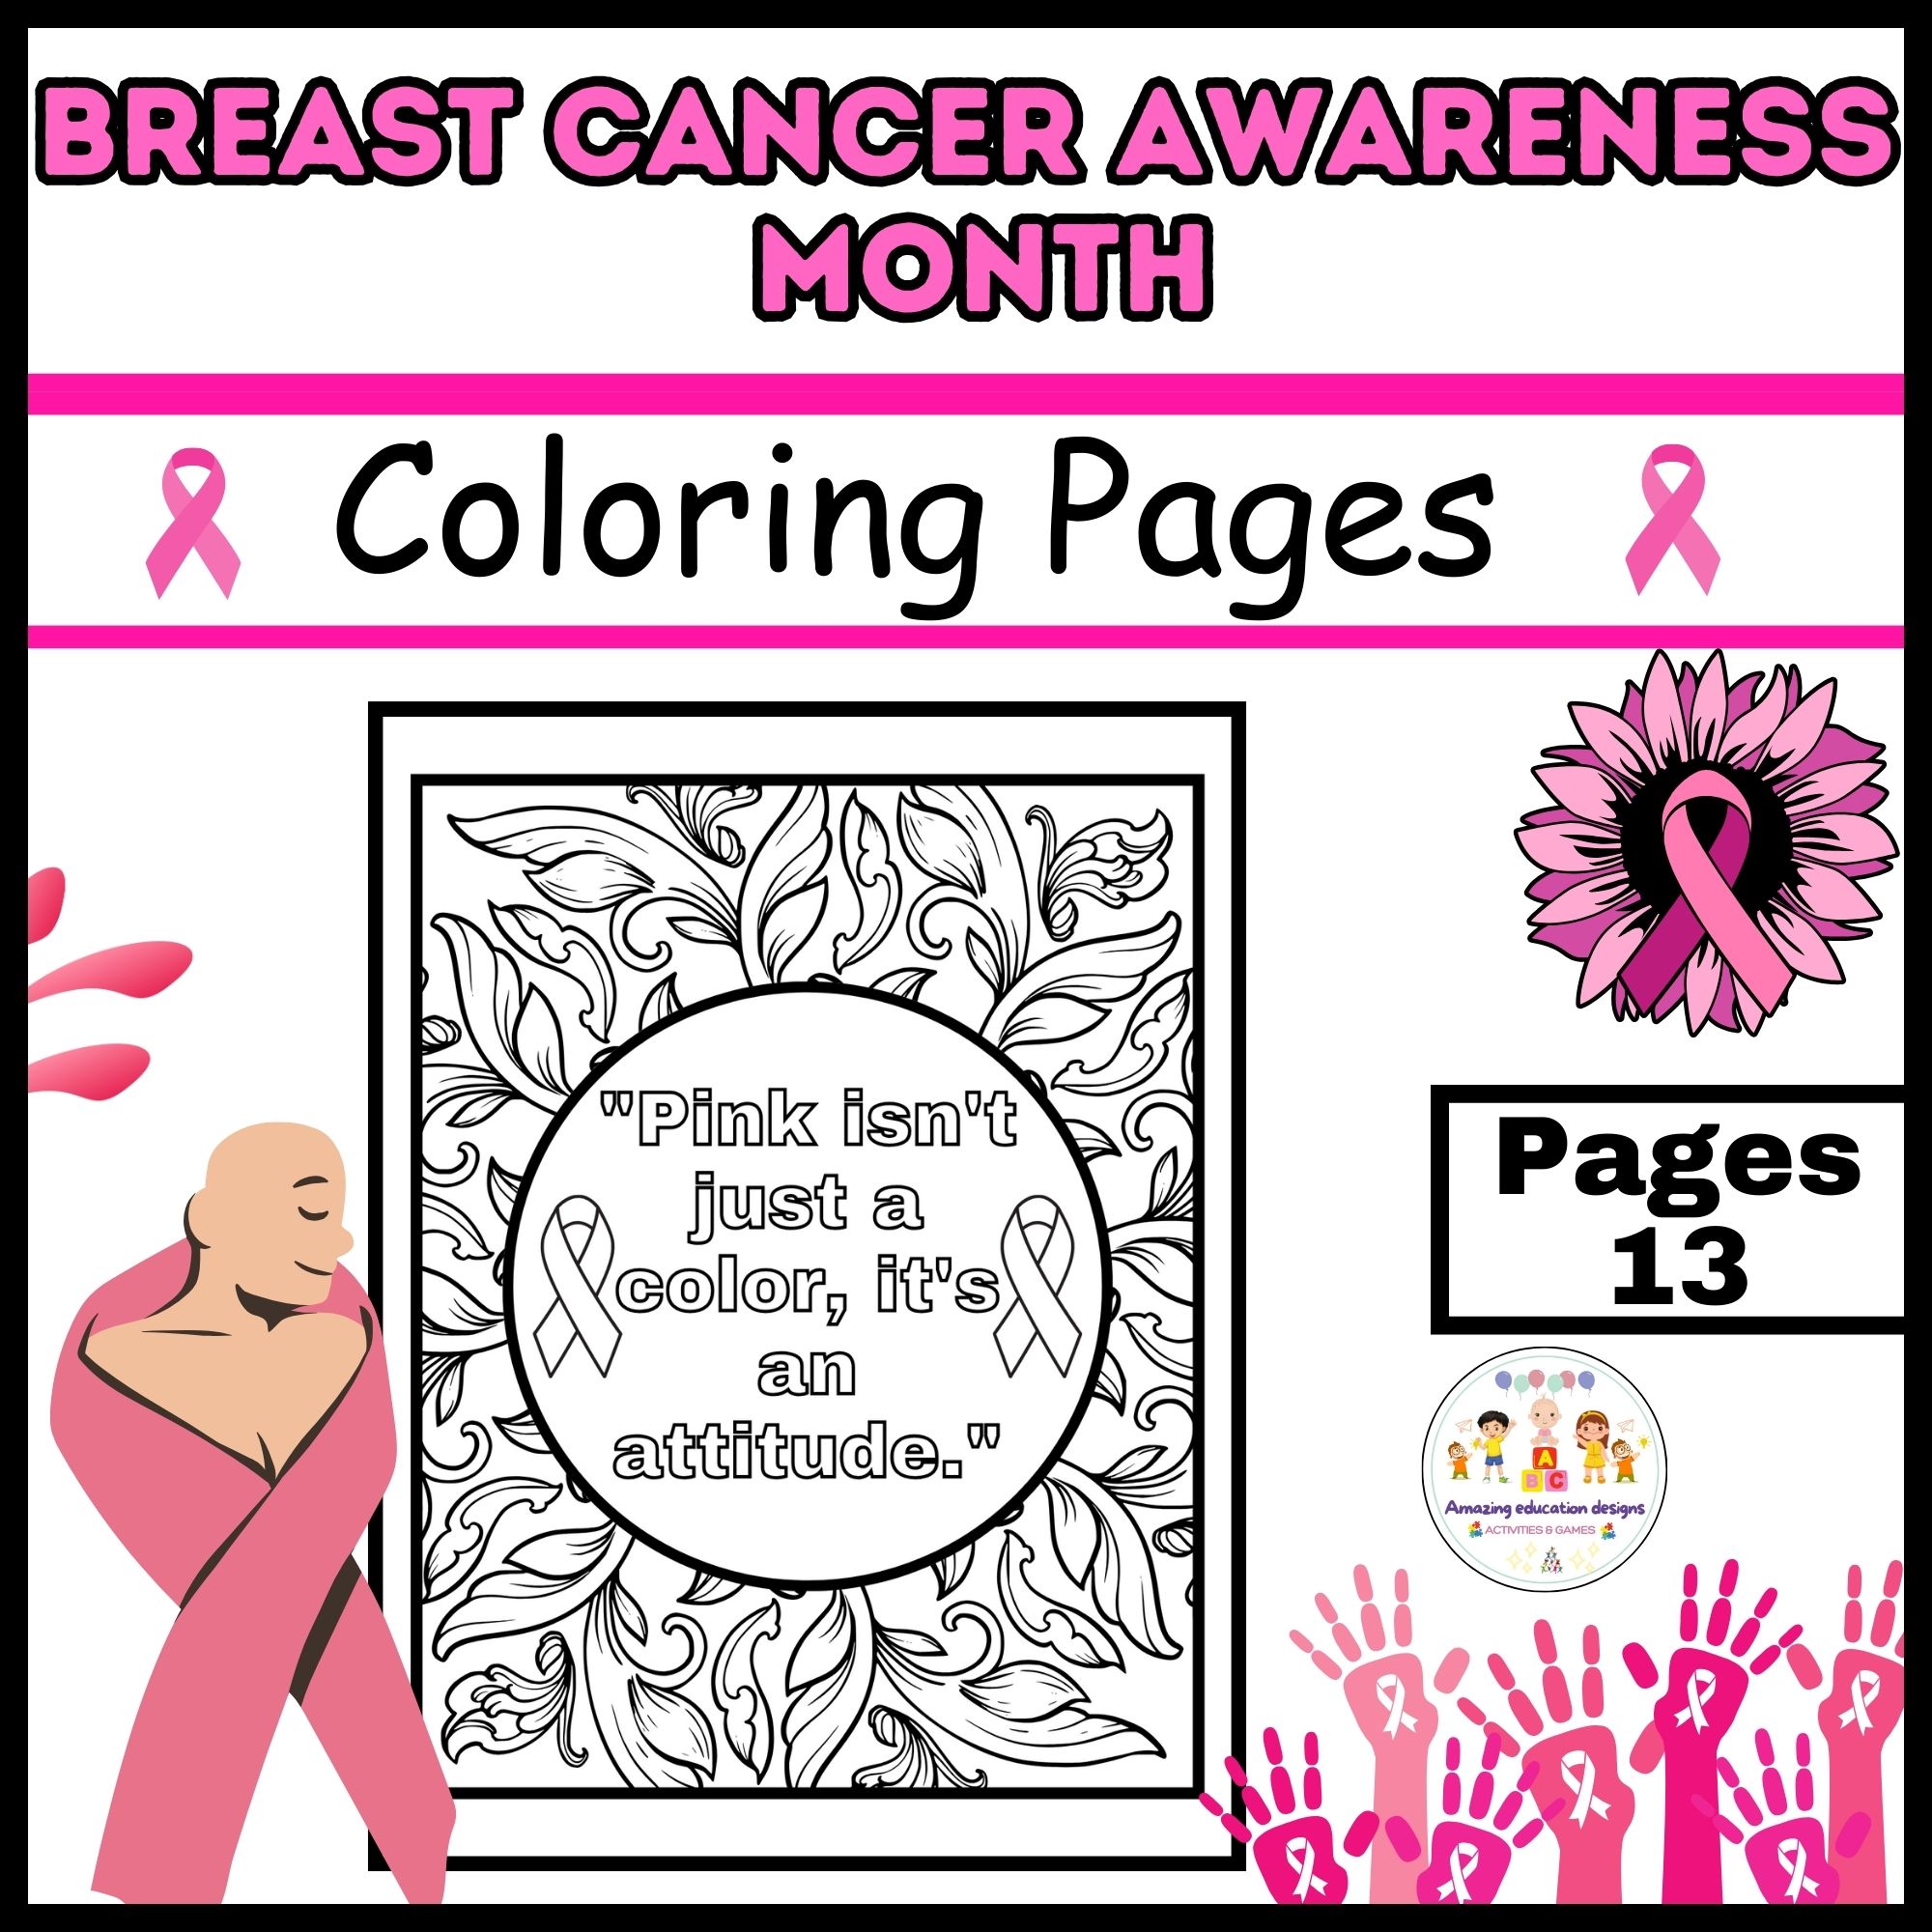 Breast cancer awareness month coloring pages worksheets made by teachers